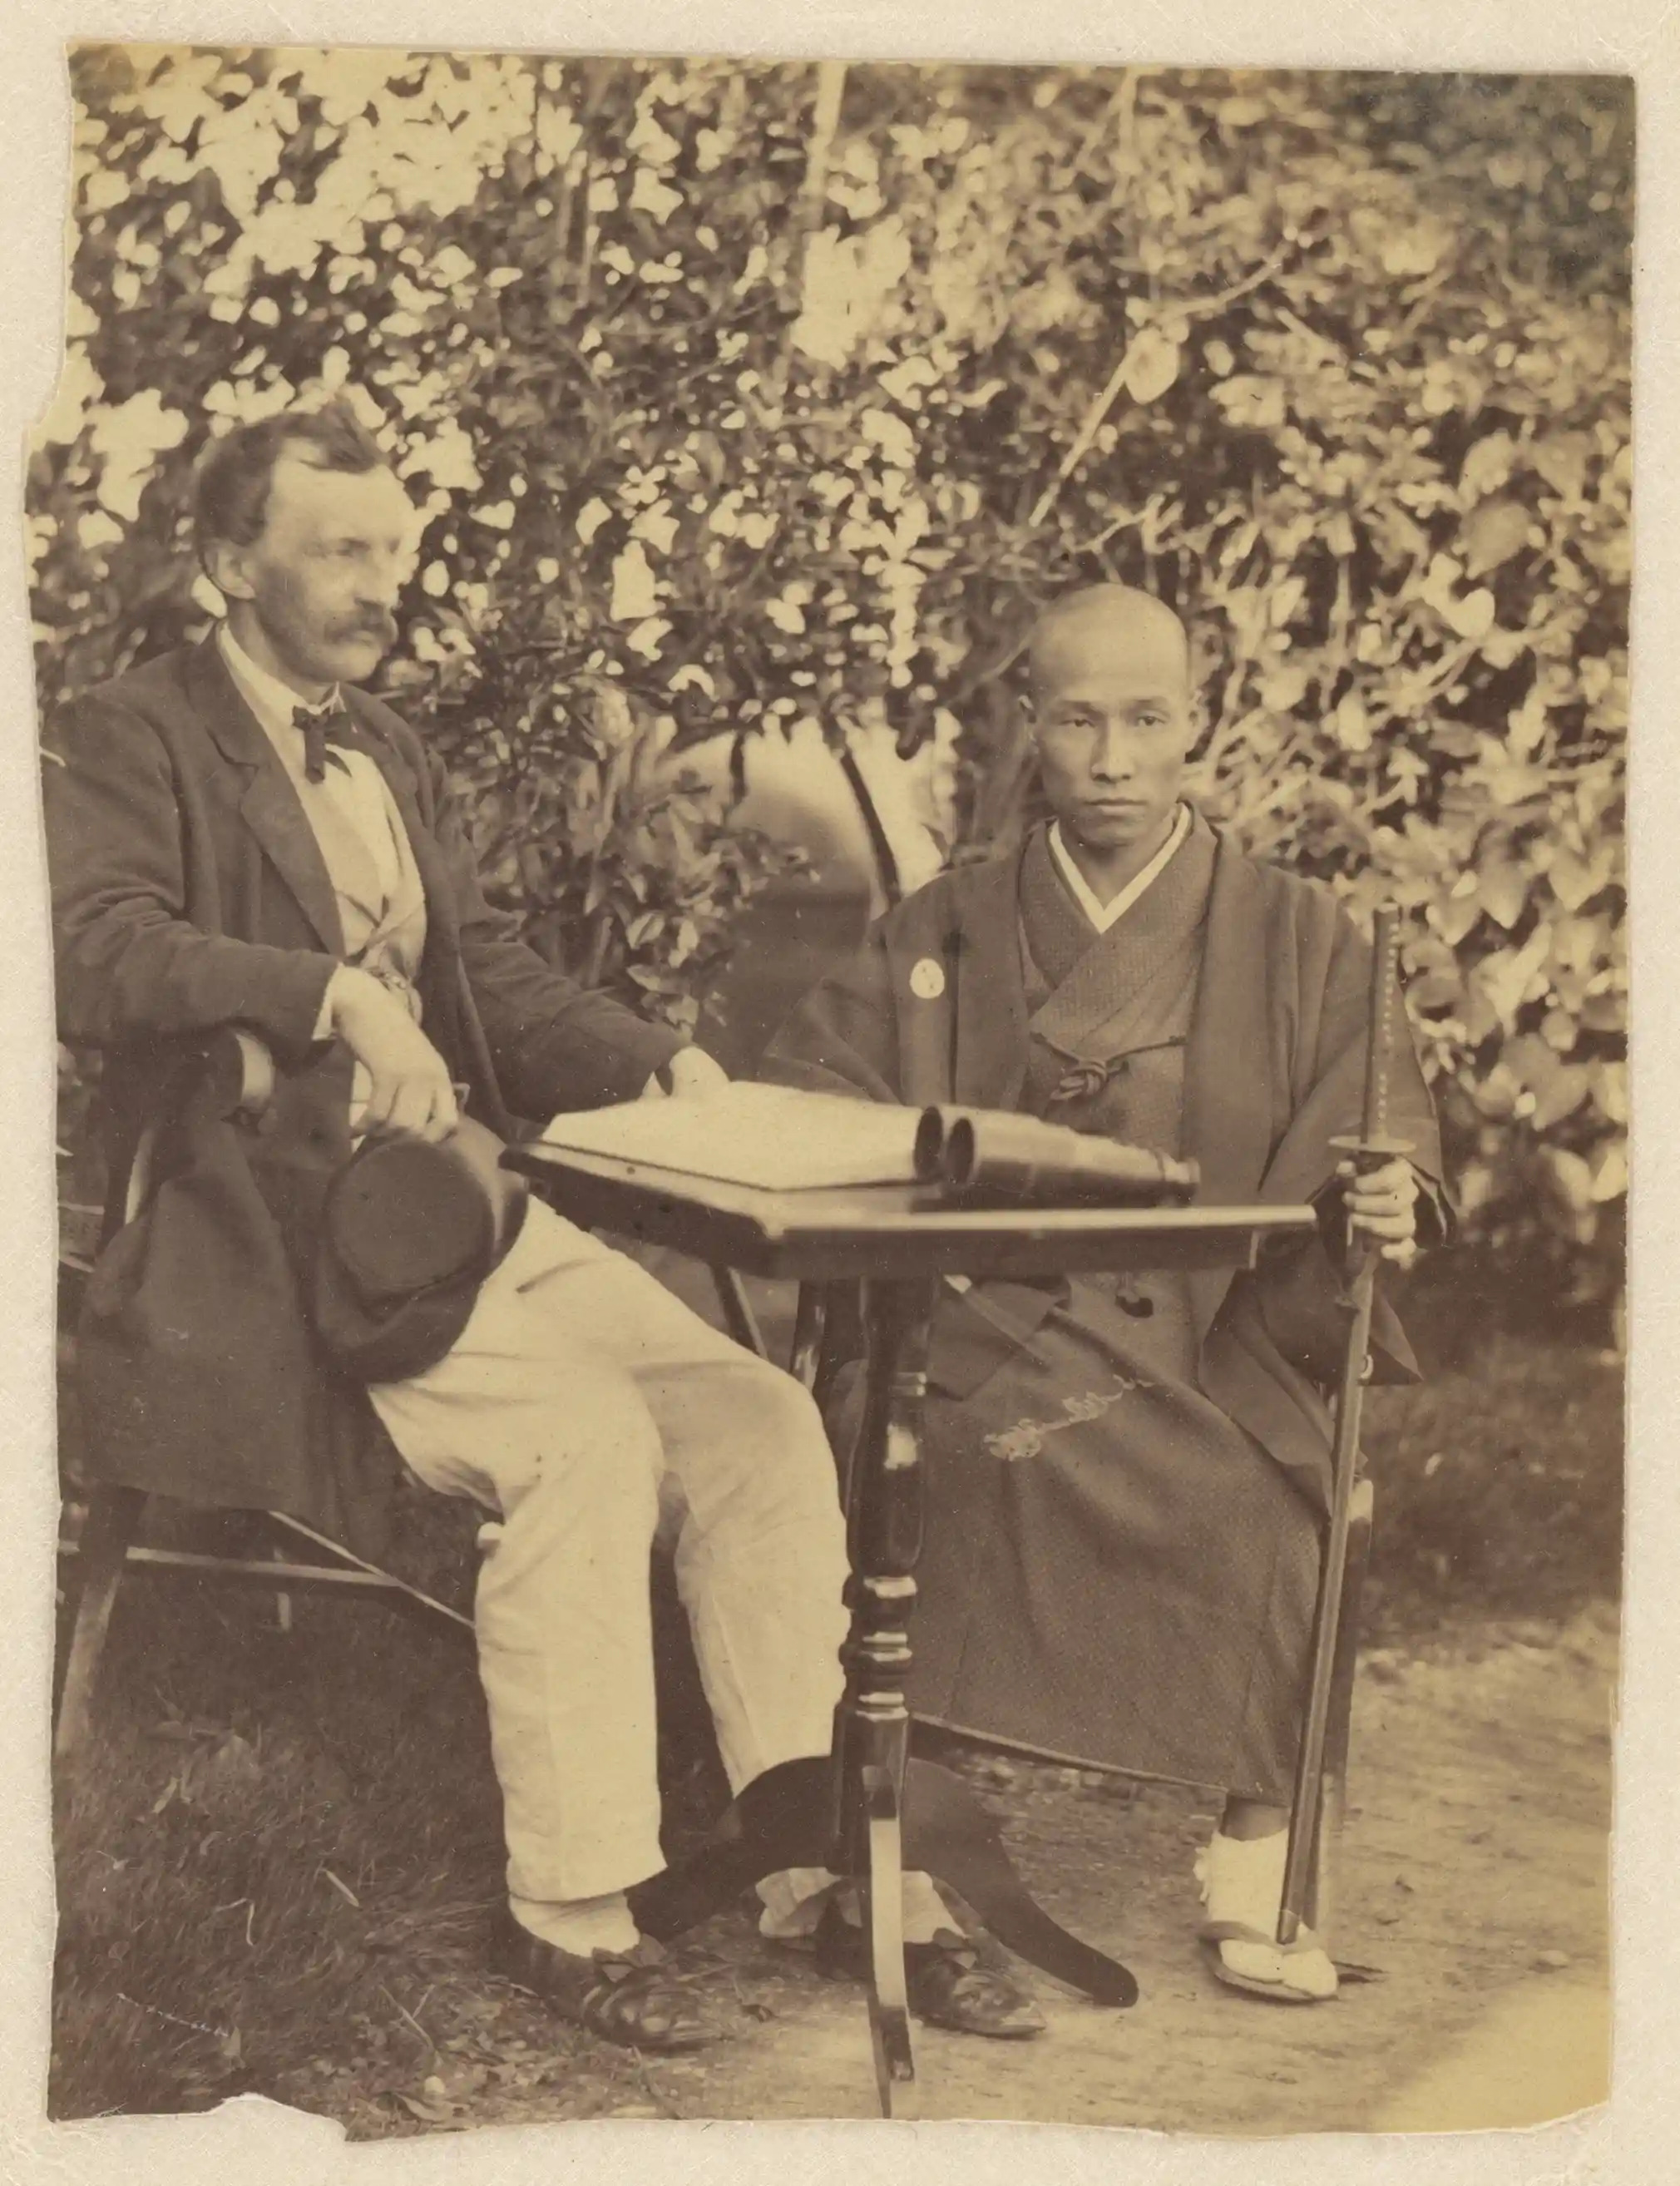 Self-portrait-with-a-Japanese-colleague-physician-c-1865.jpg